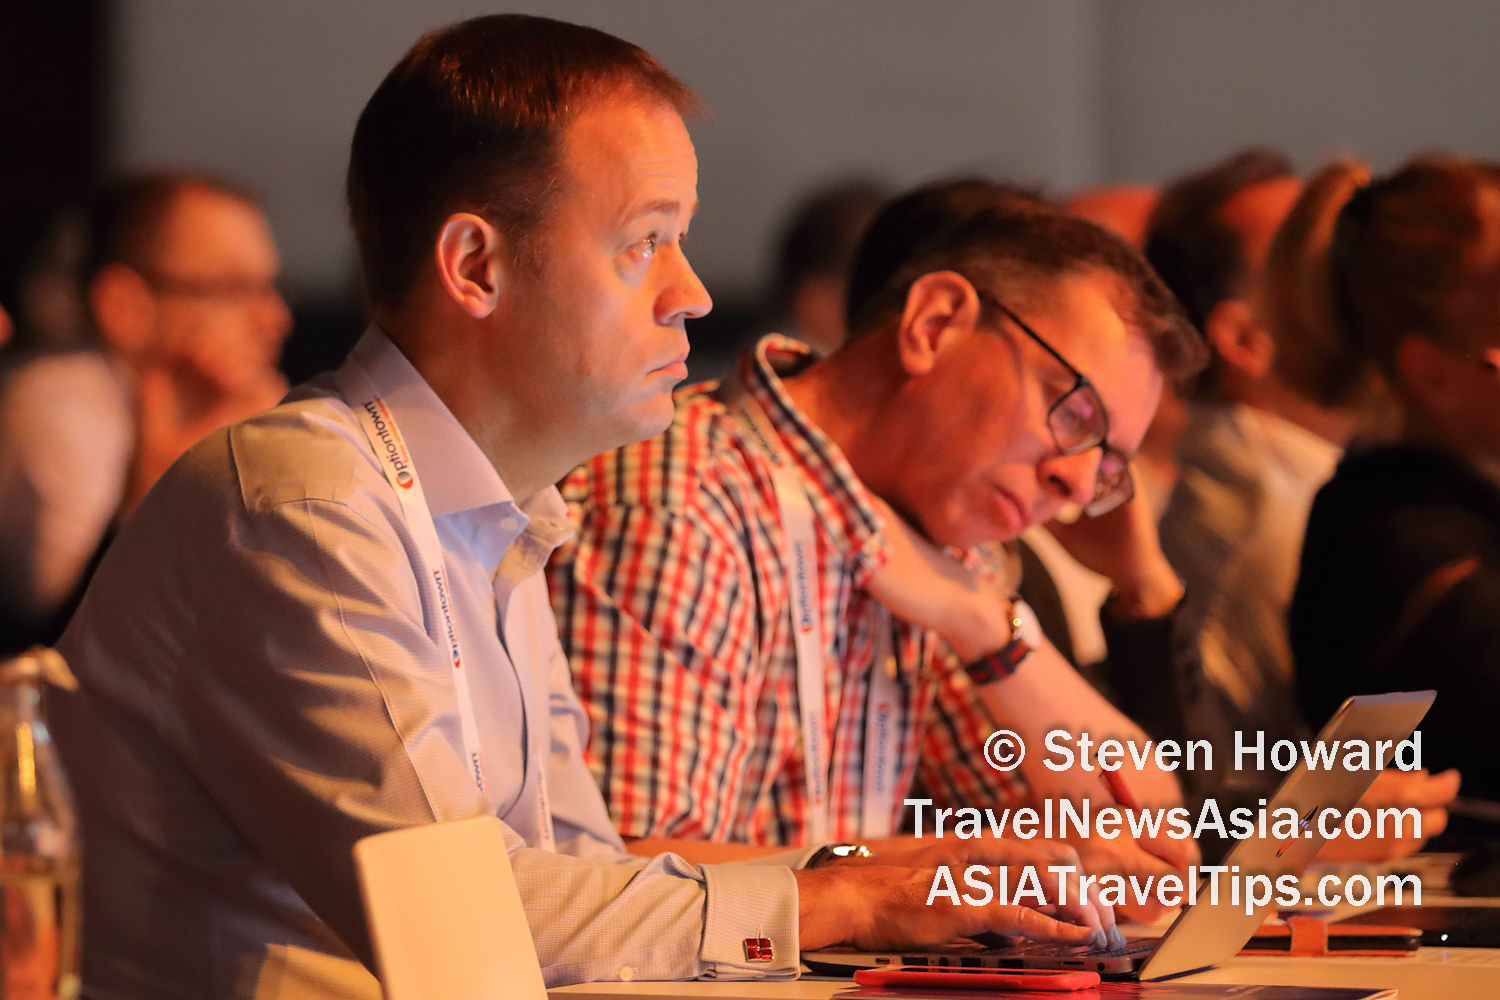 Delegates attending the IATA Airline Industry Retailing Symposium (AIR) in Bangkok in 2019. Picture by Steven Howard of TravelNewsAsia.com Click to enlarge.